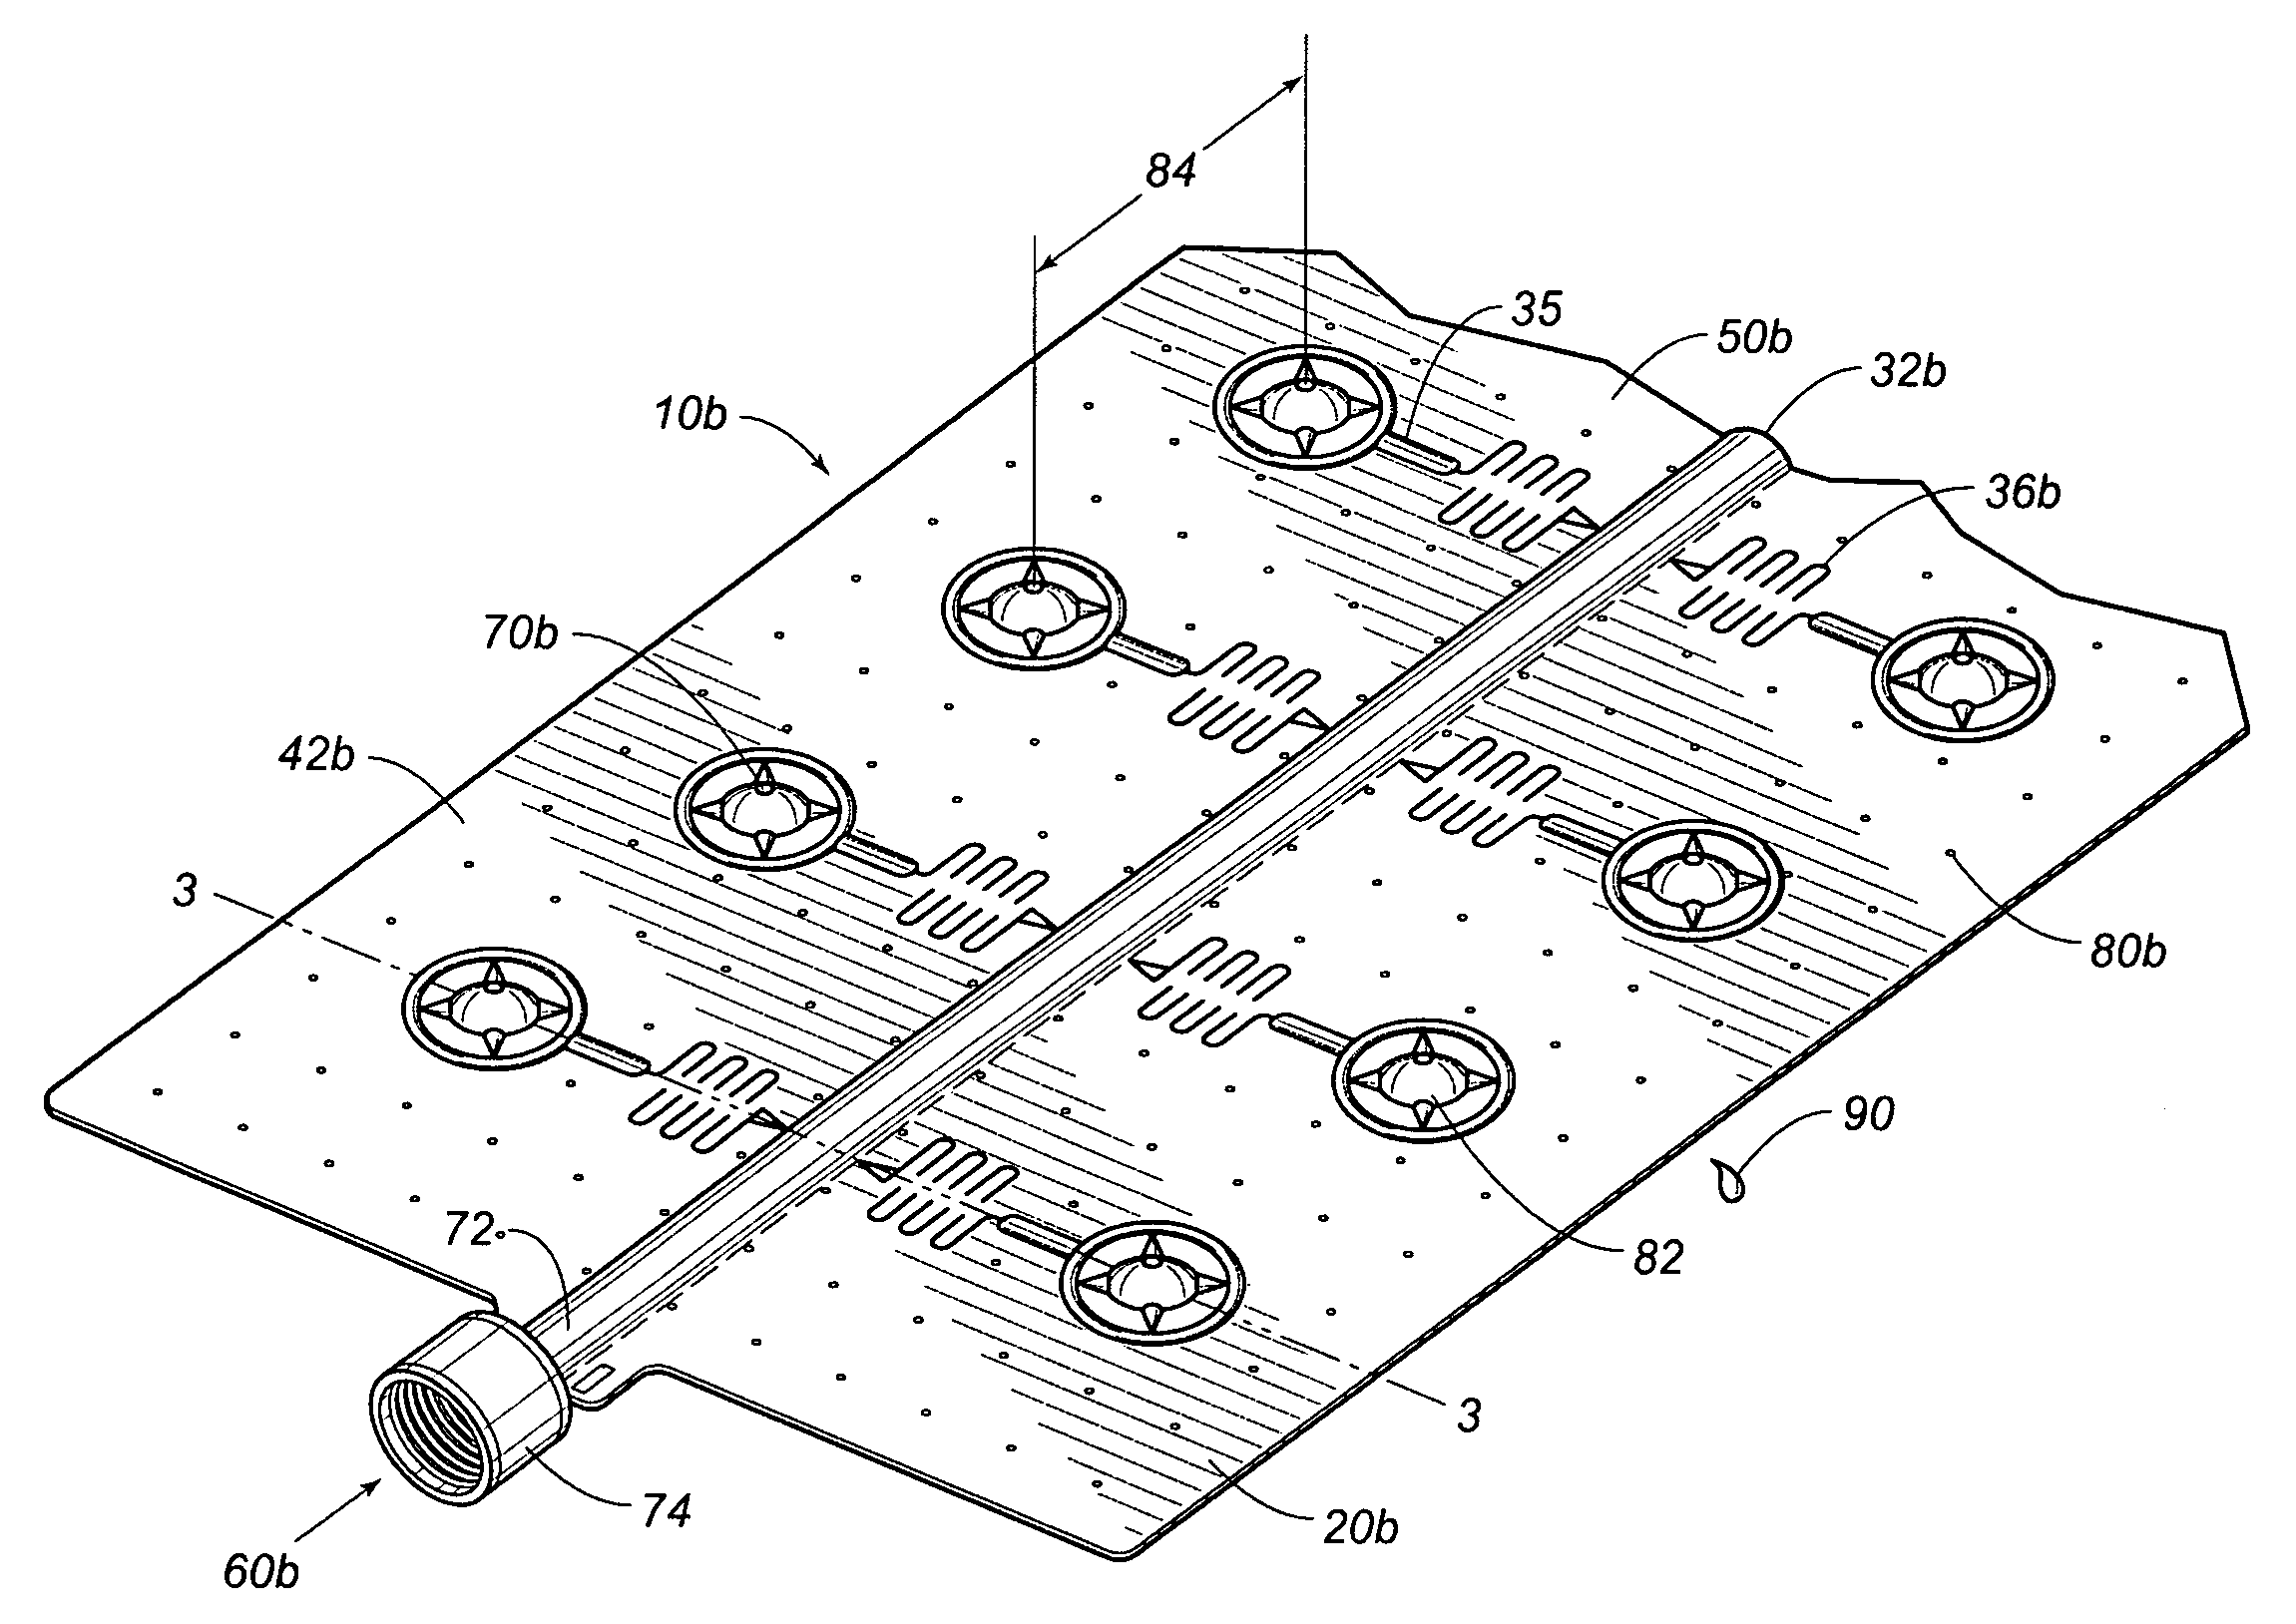 Unitized mat to facilitate growing plants